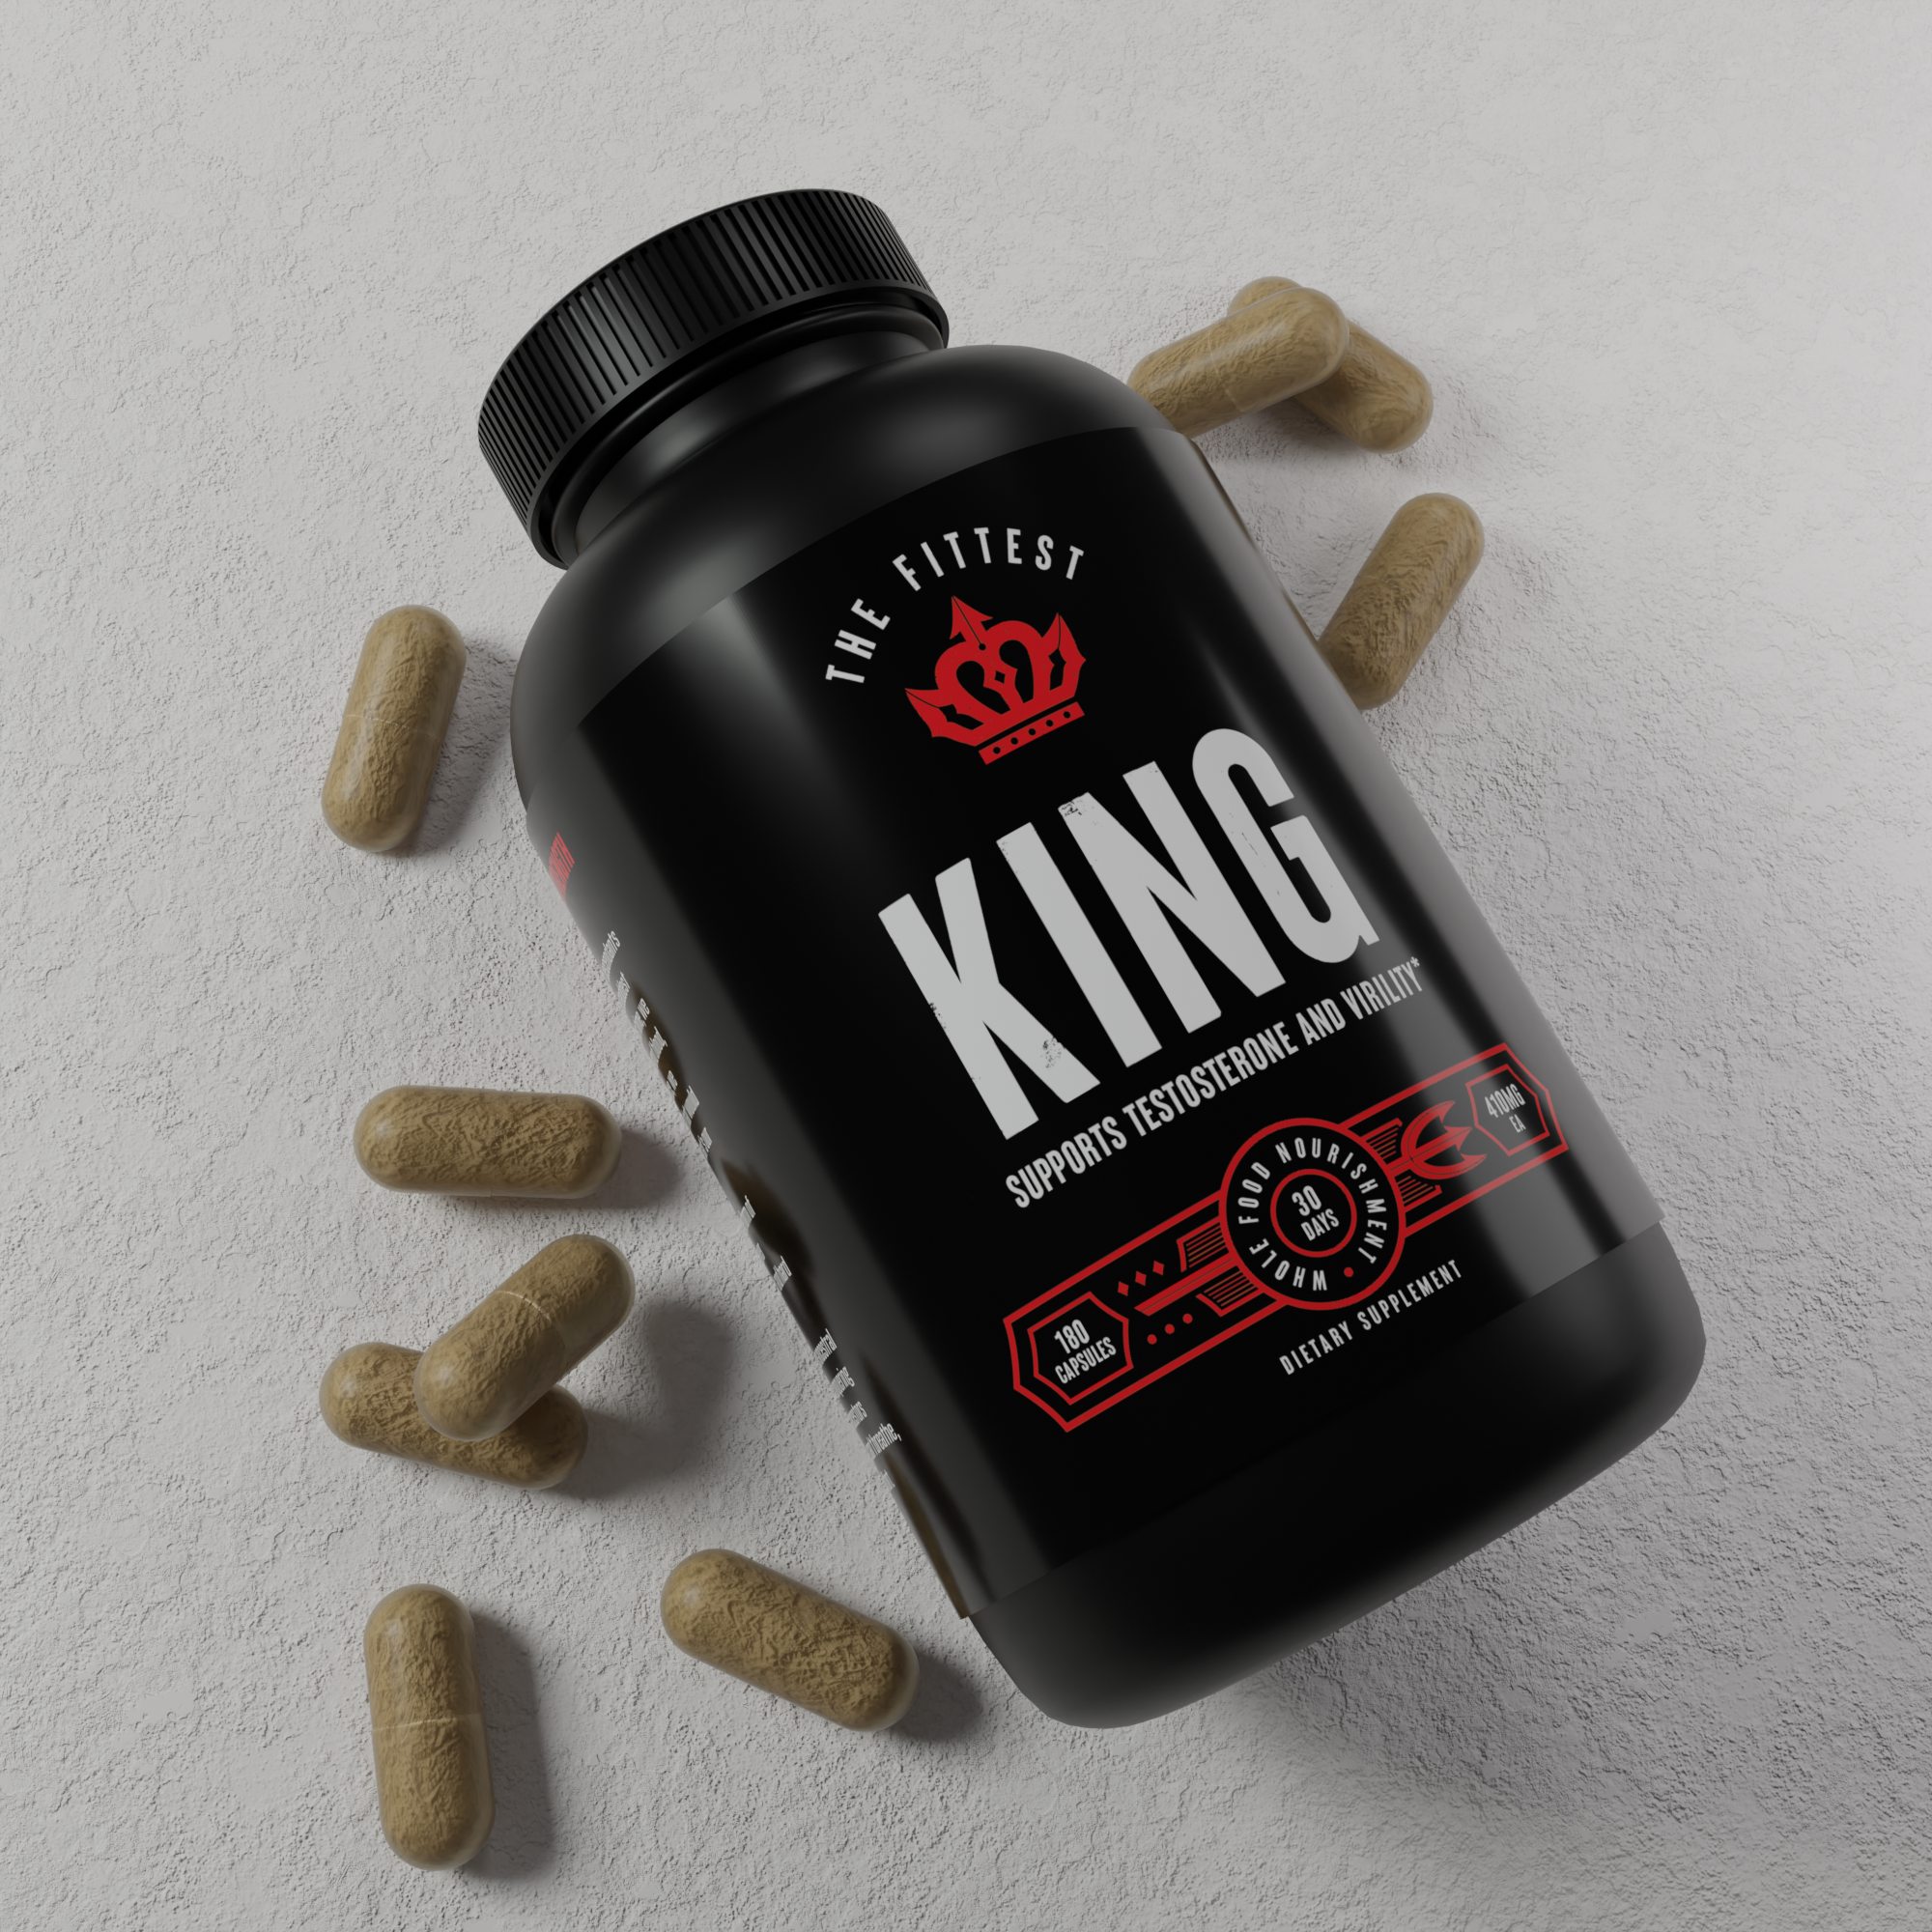 Bottle of King laying over a pile of capsules which have spilled out on the table